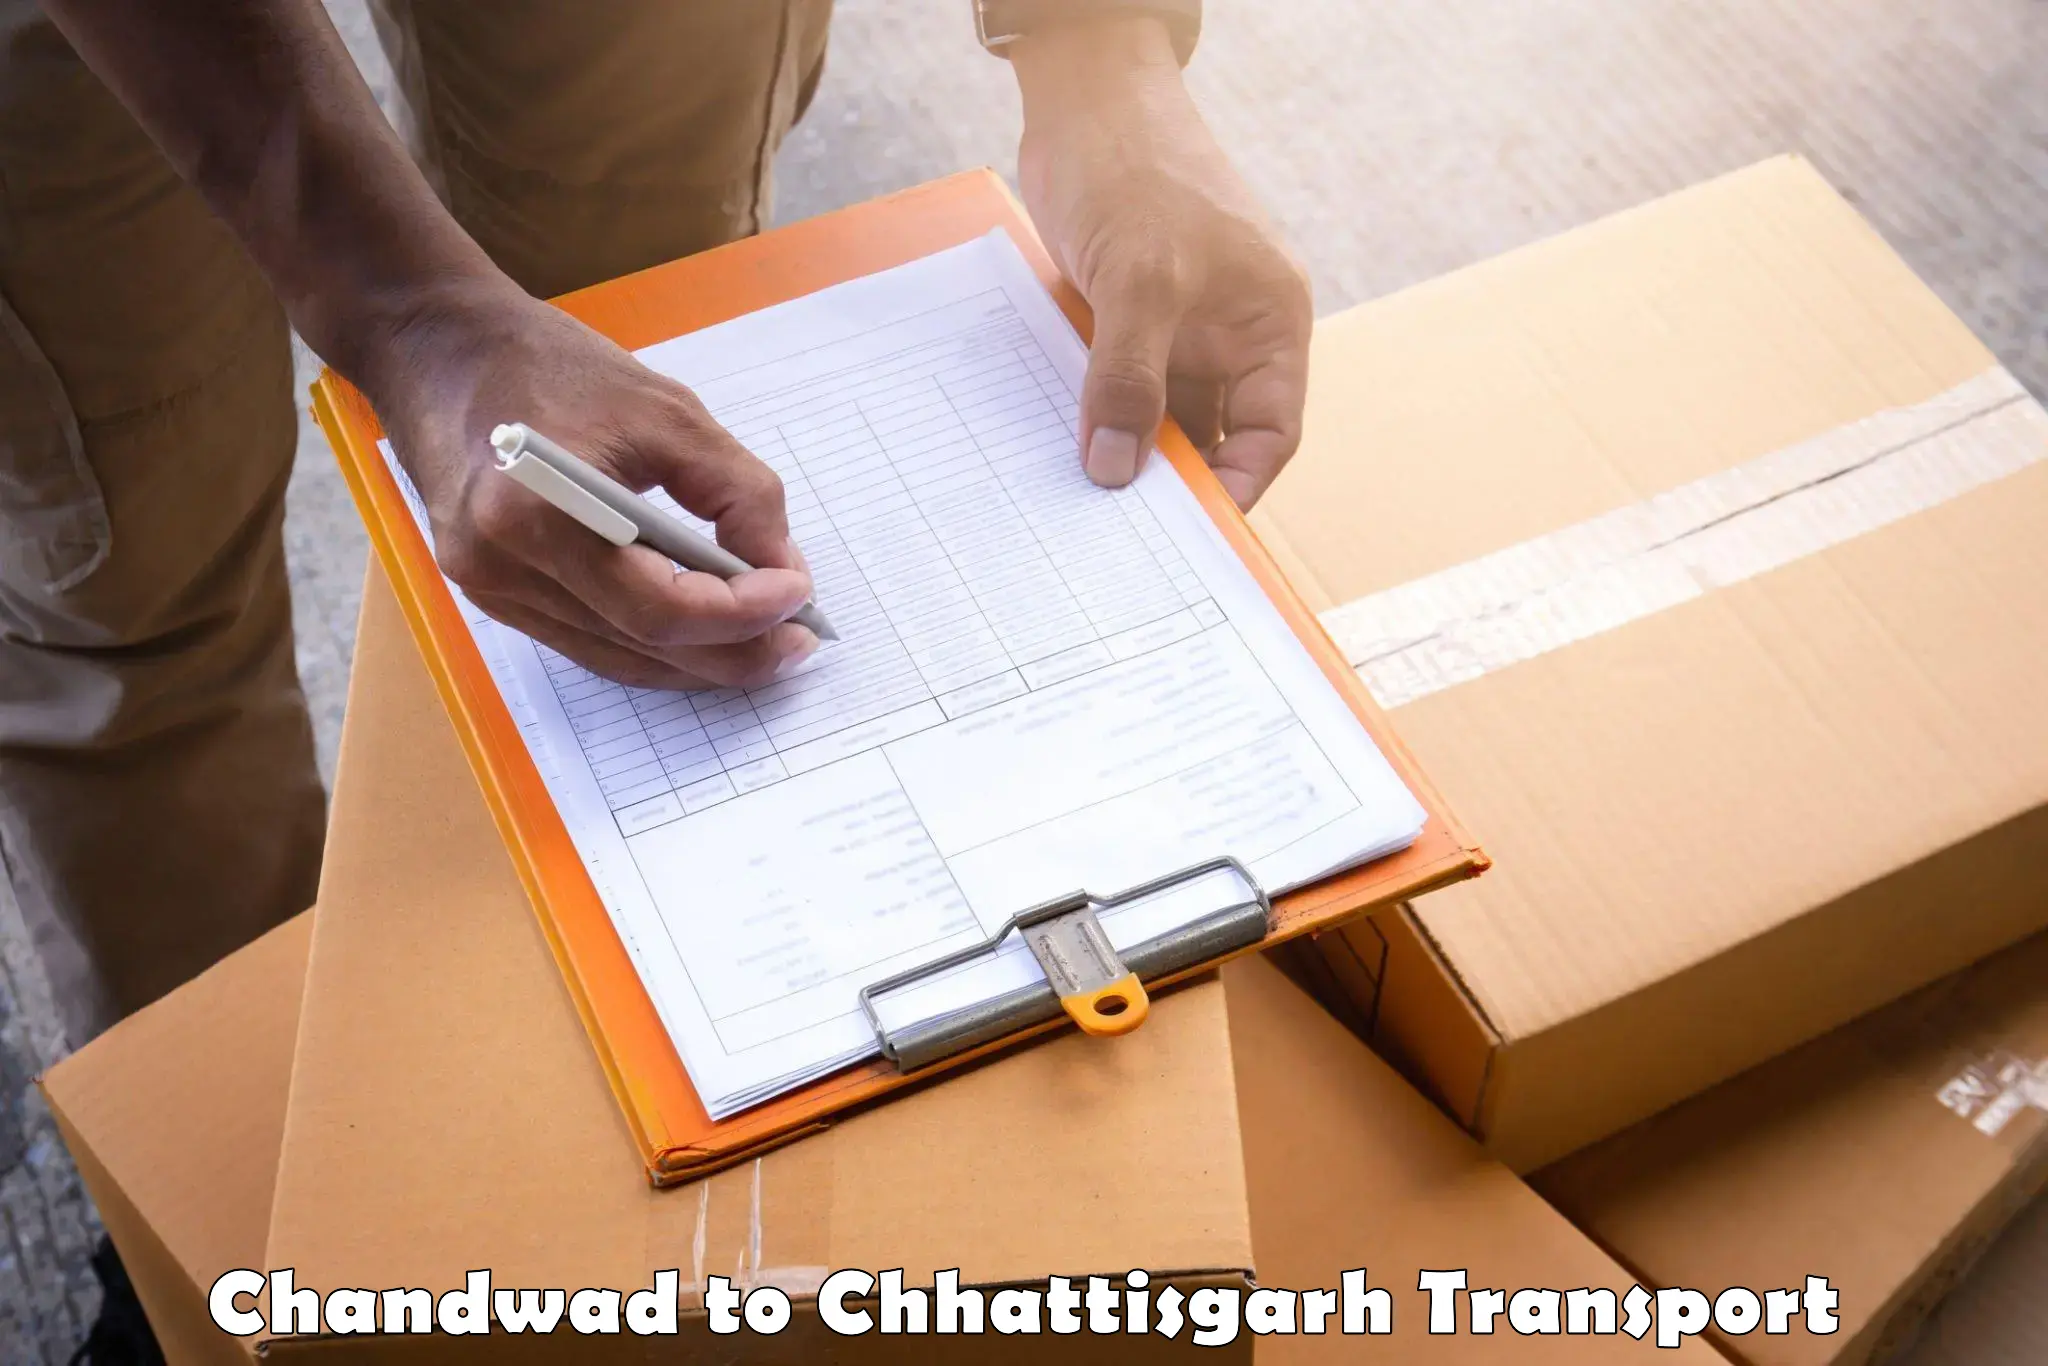 Truck transport companies in India Chandwad to Rajnandgaon